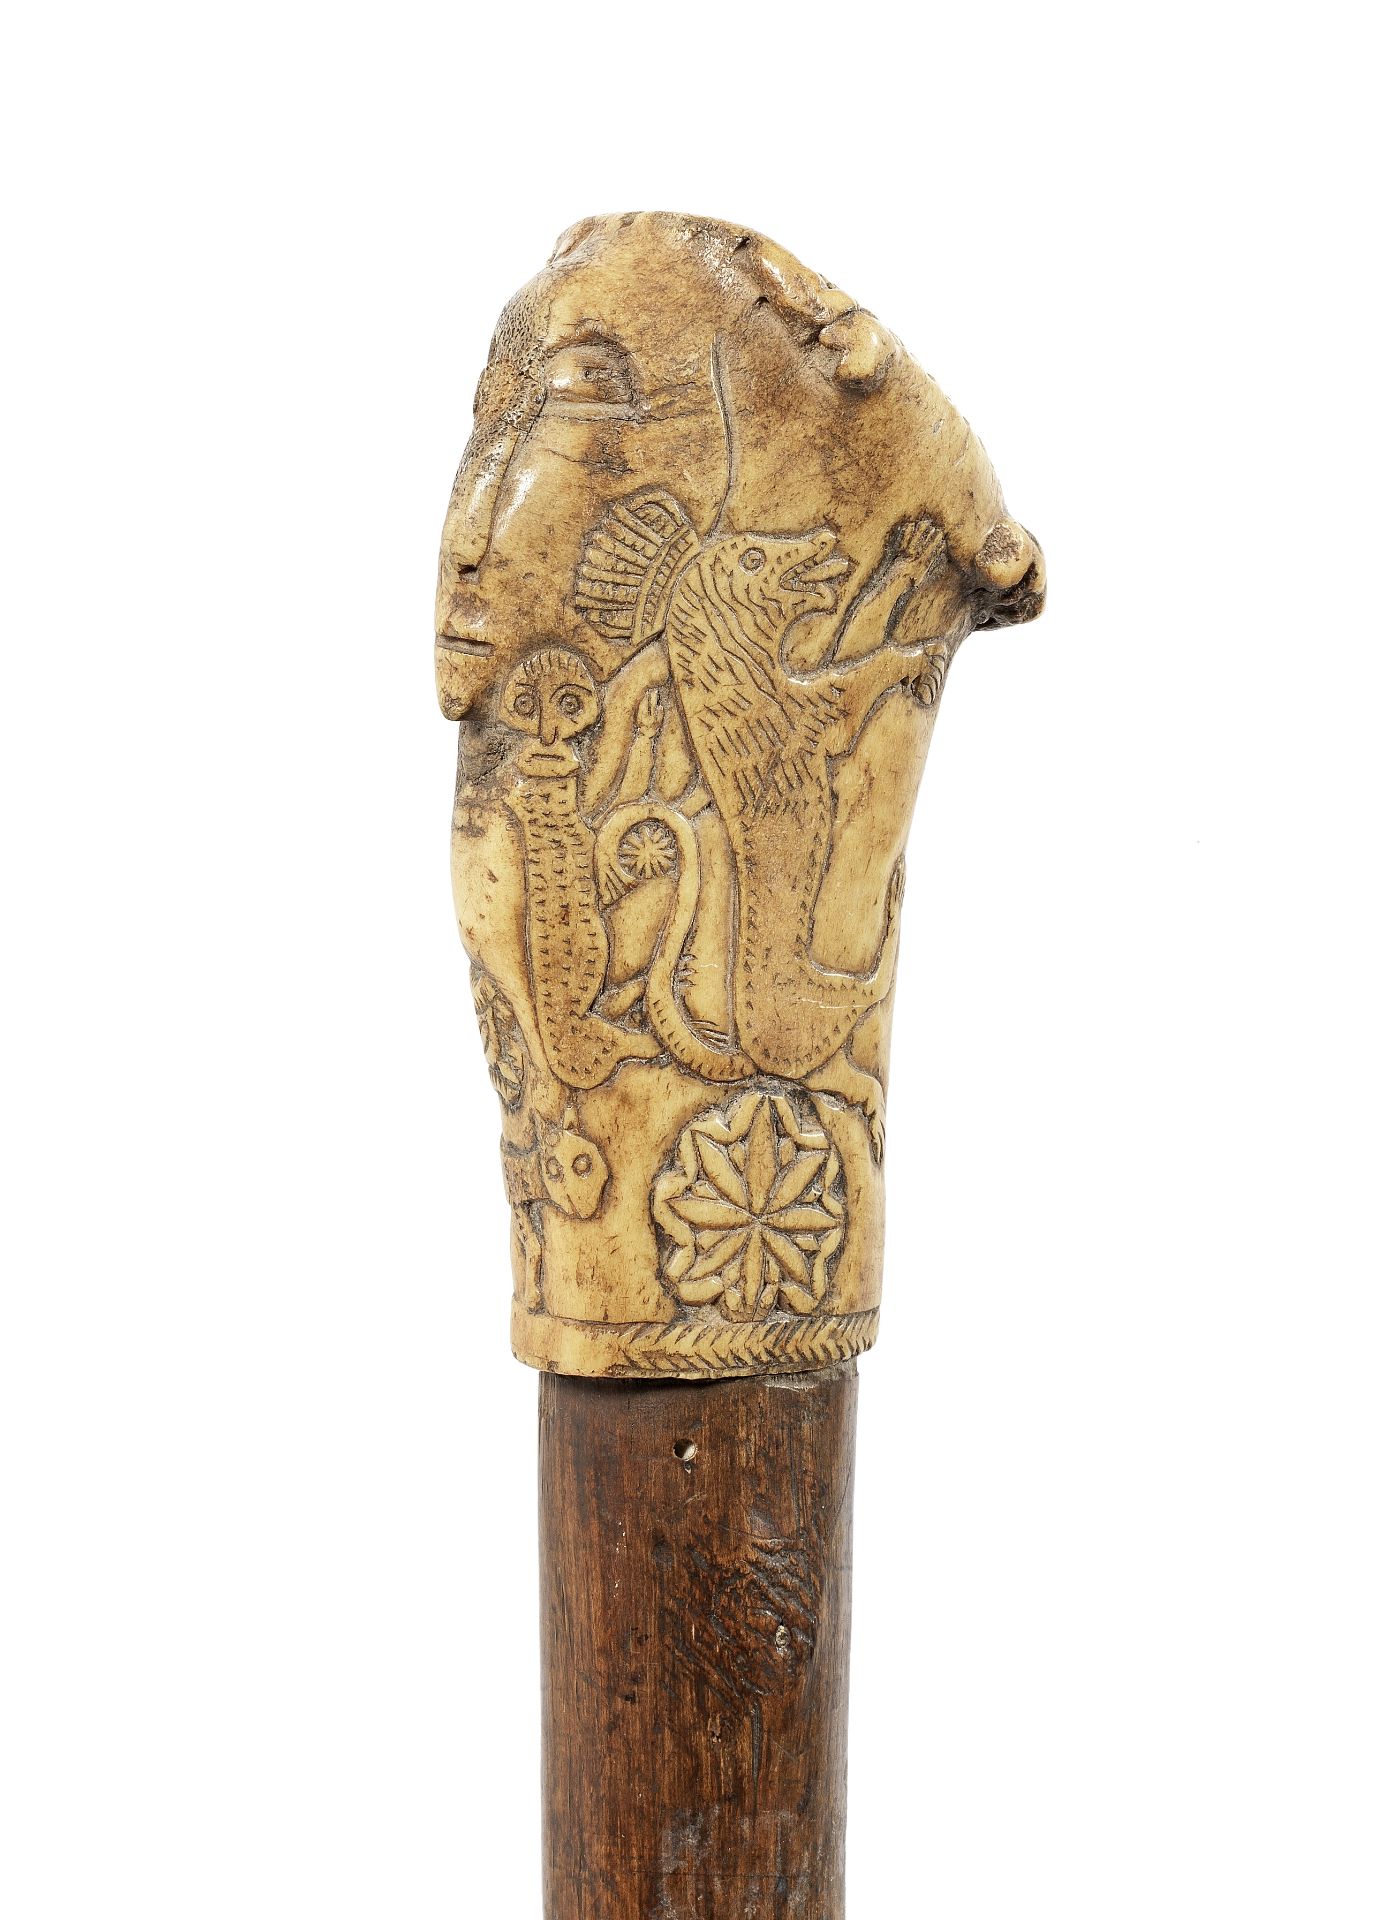 A possibly 17th/18th century beech and carved antler coronet walking or fighting stick